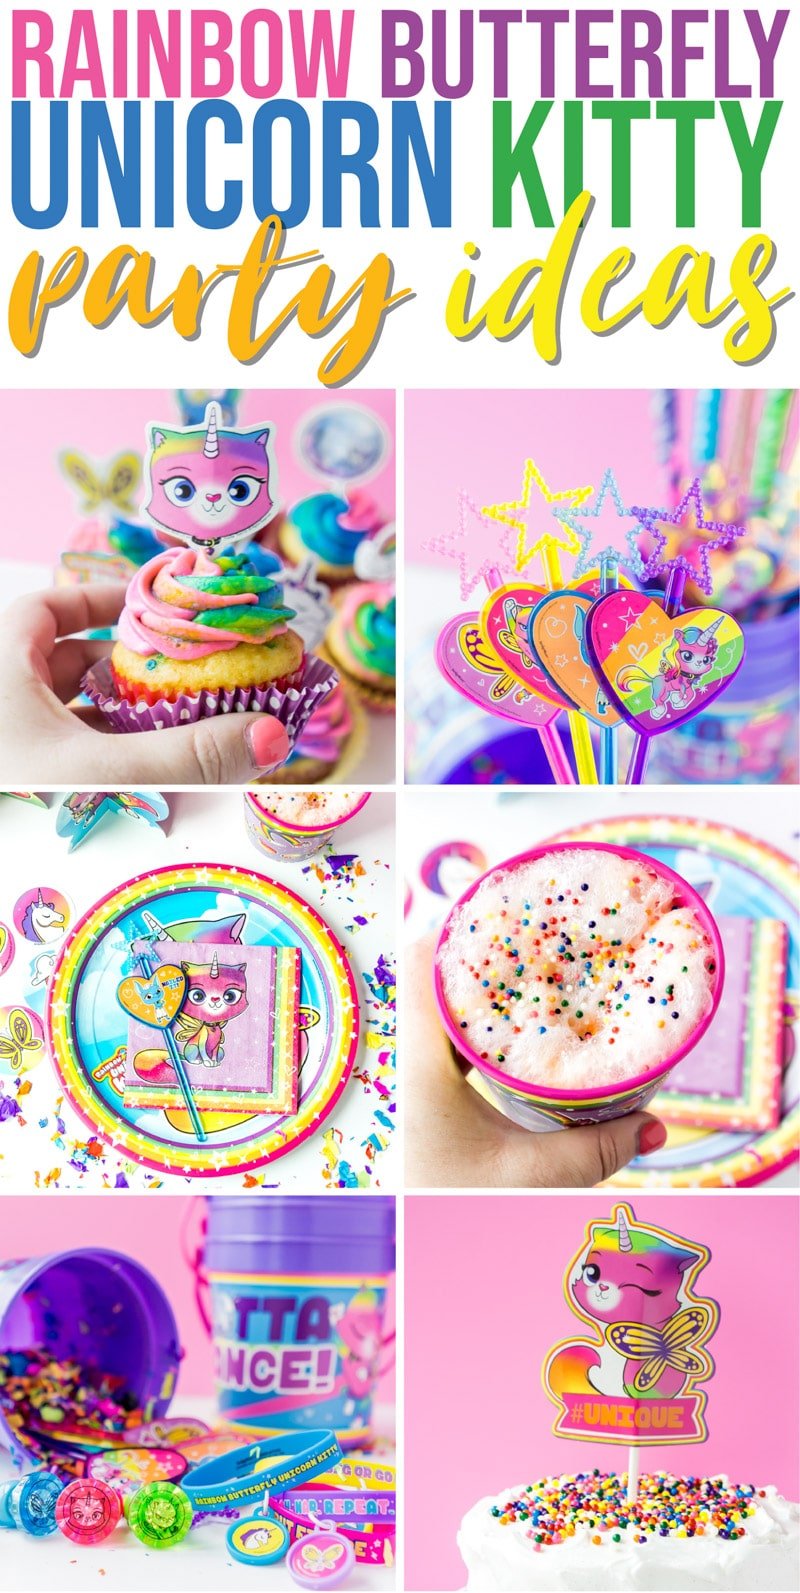 The best rainbow butterfly unicorn kitty party ideas! Everything you need - food, decorations, favors, and more for one colorful celebration.